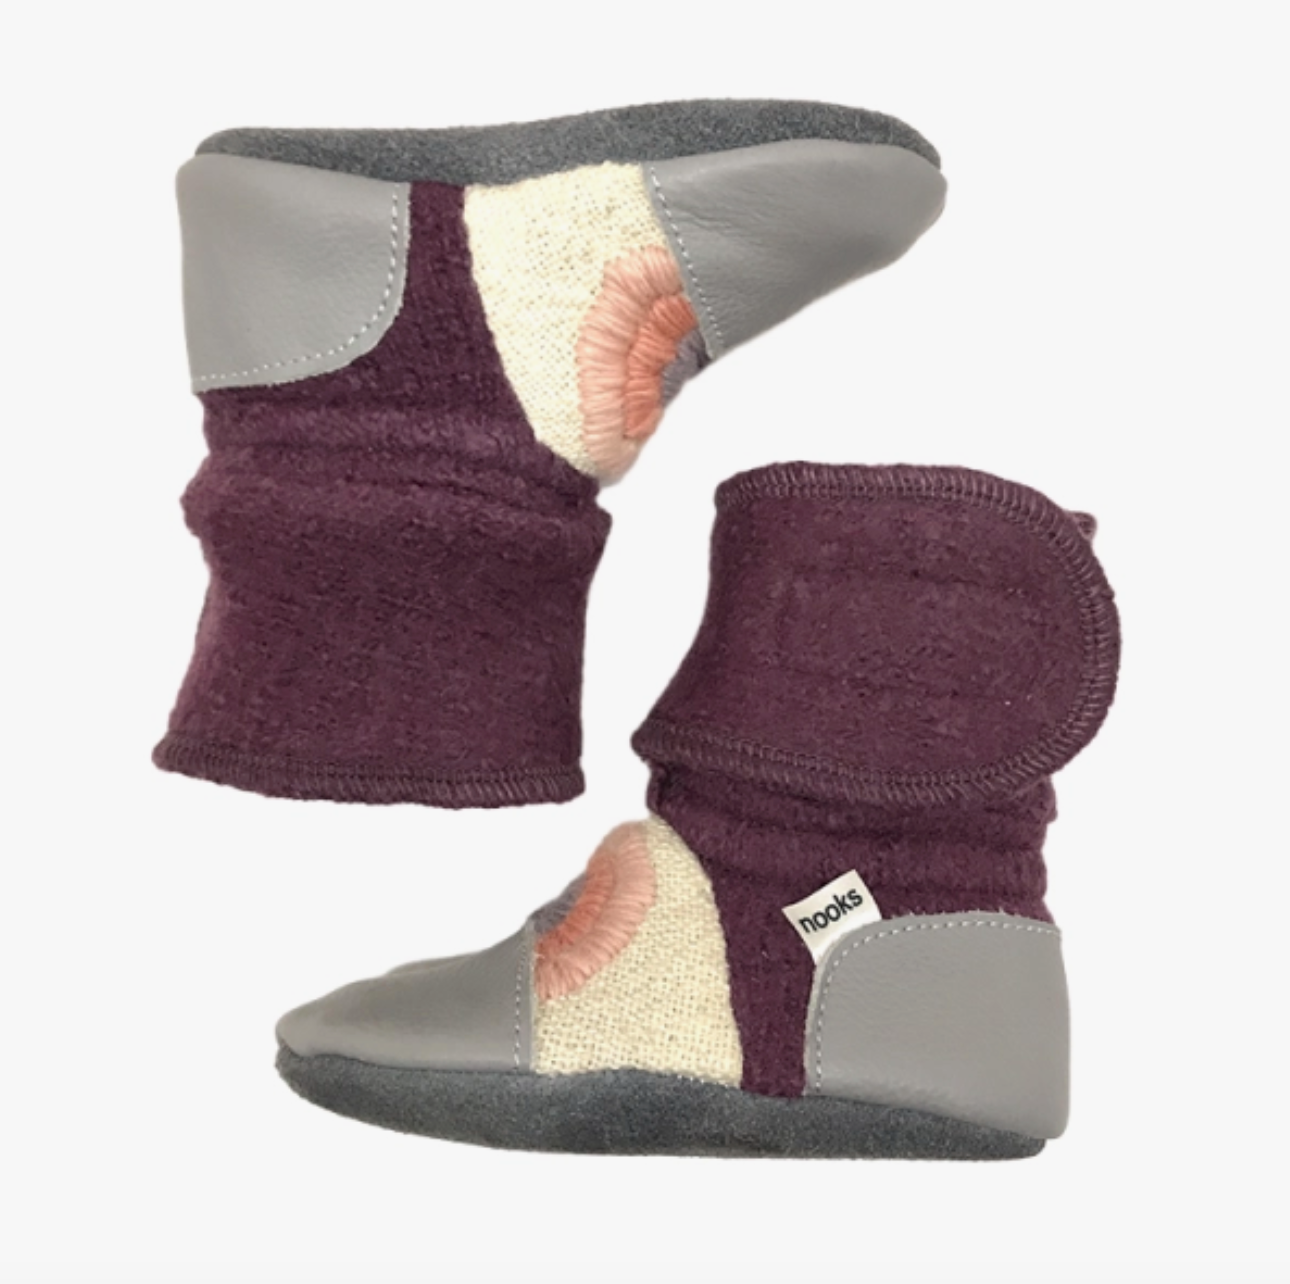 Dream On Embroidered Felted Wool Booties | Nooks